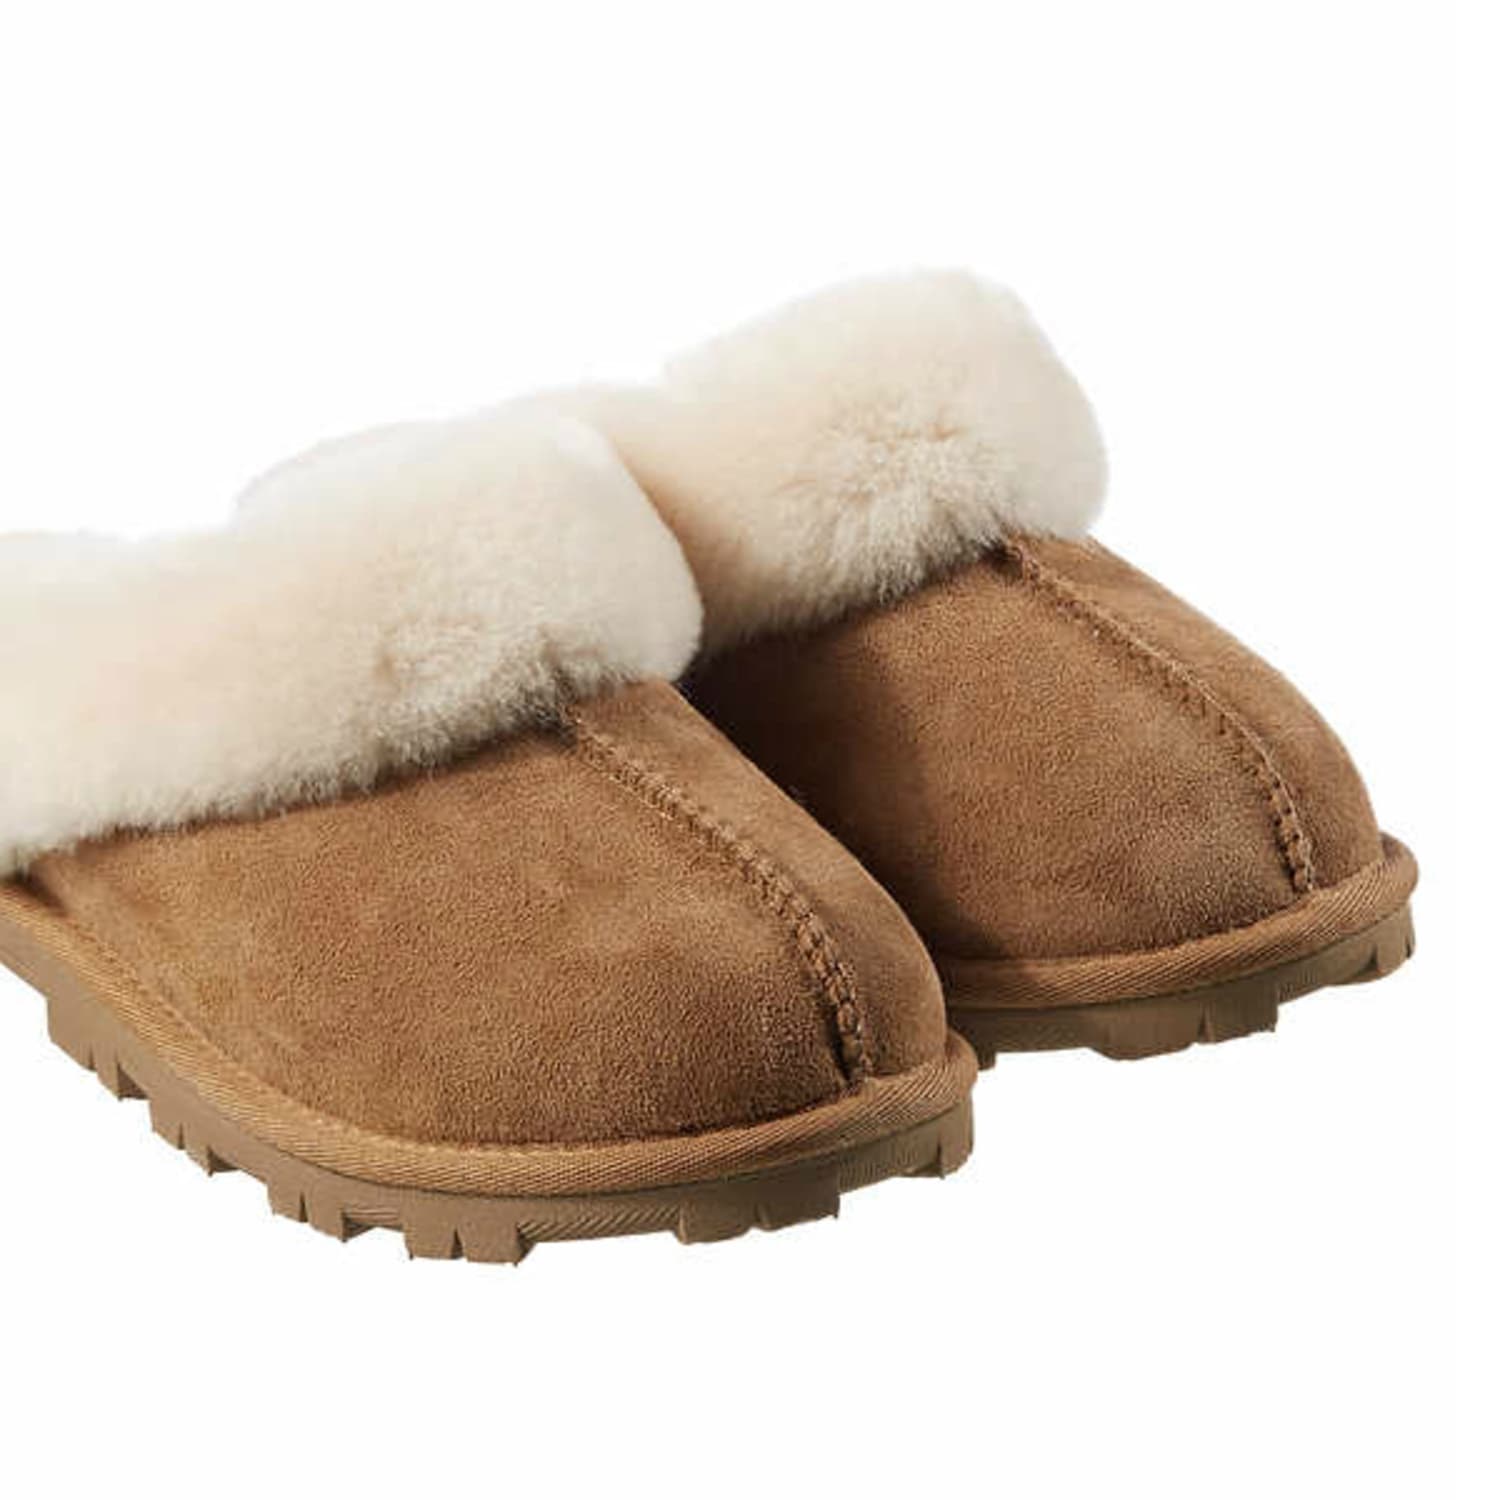 $20 Slippers That Are A UGG Dupe 